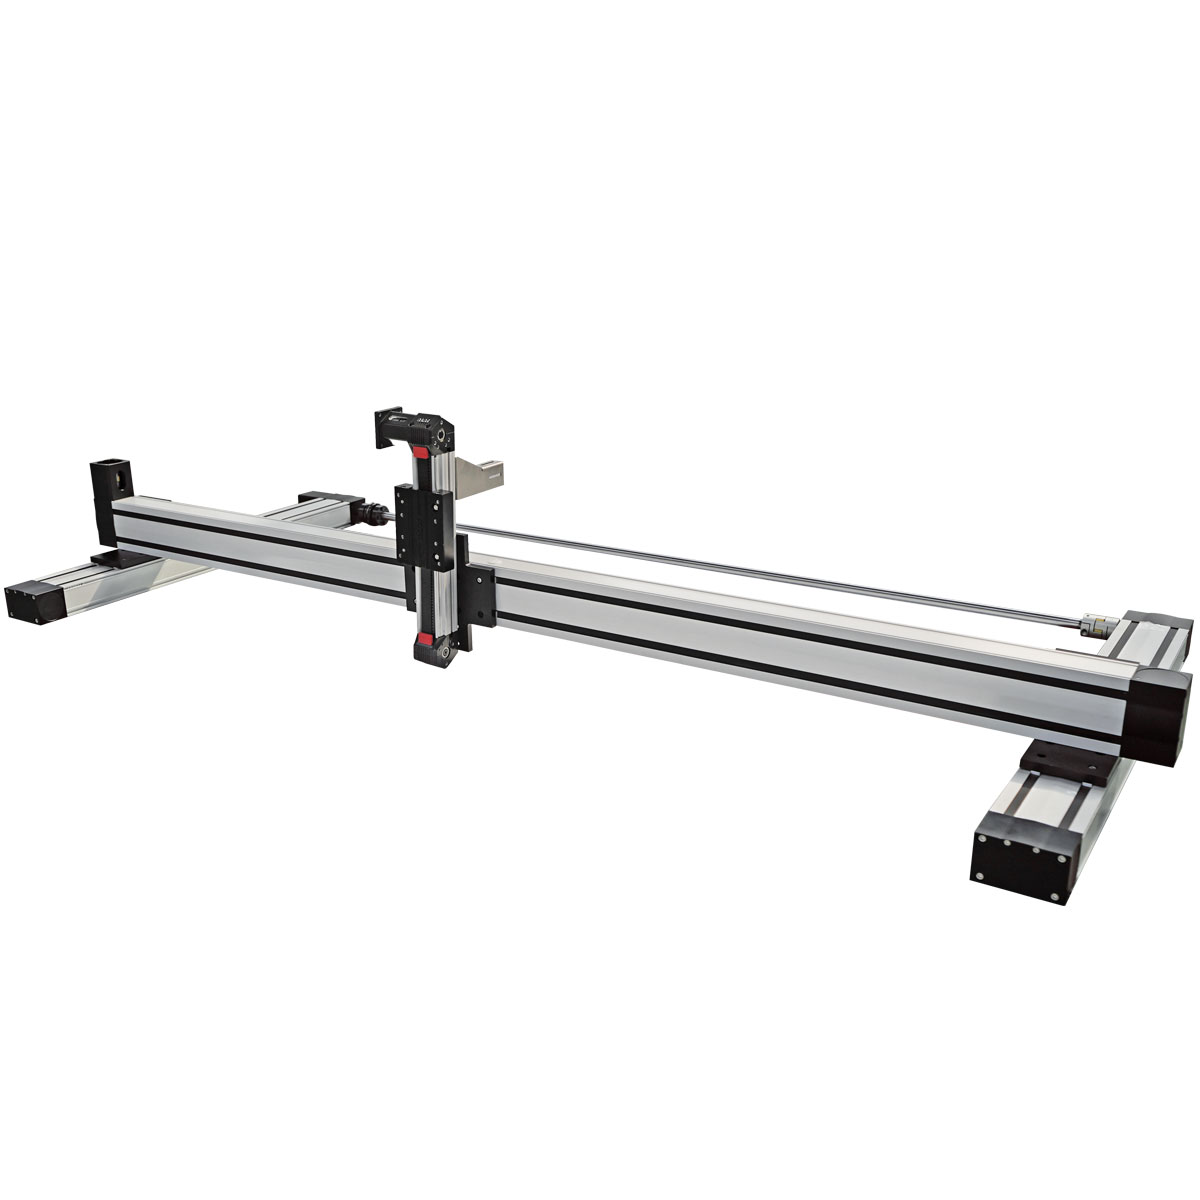 Linear Rail Guide Belt Driven Actuator Multi-axis Positioning Stage